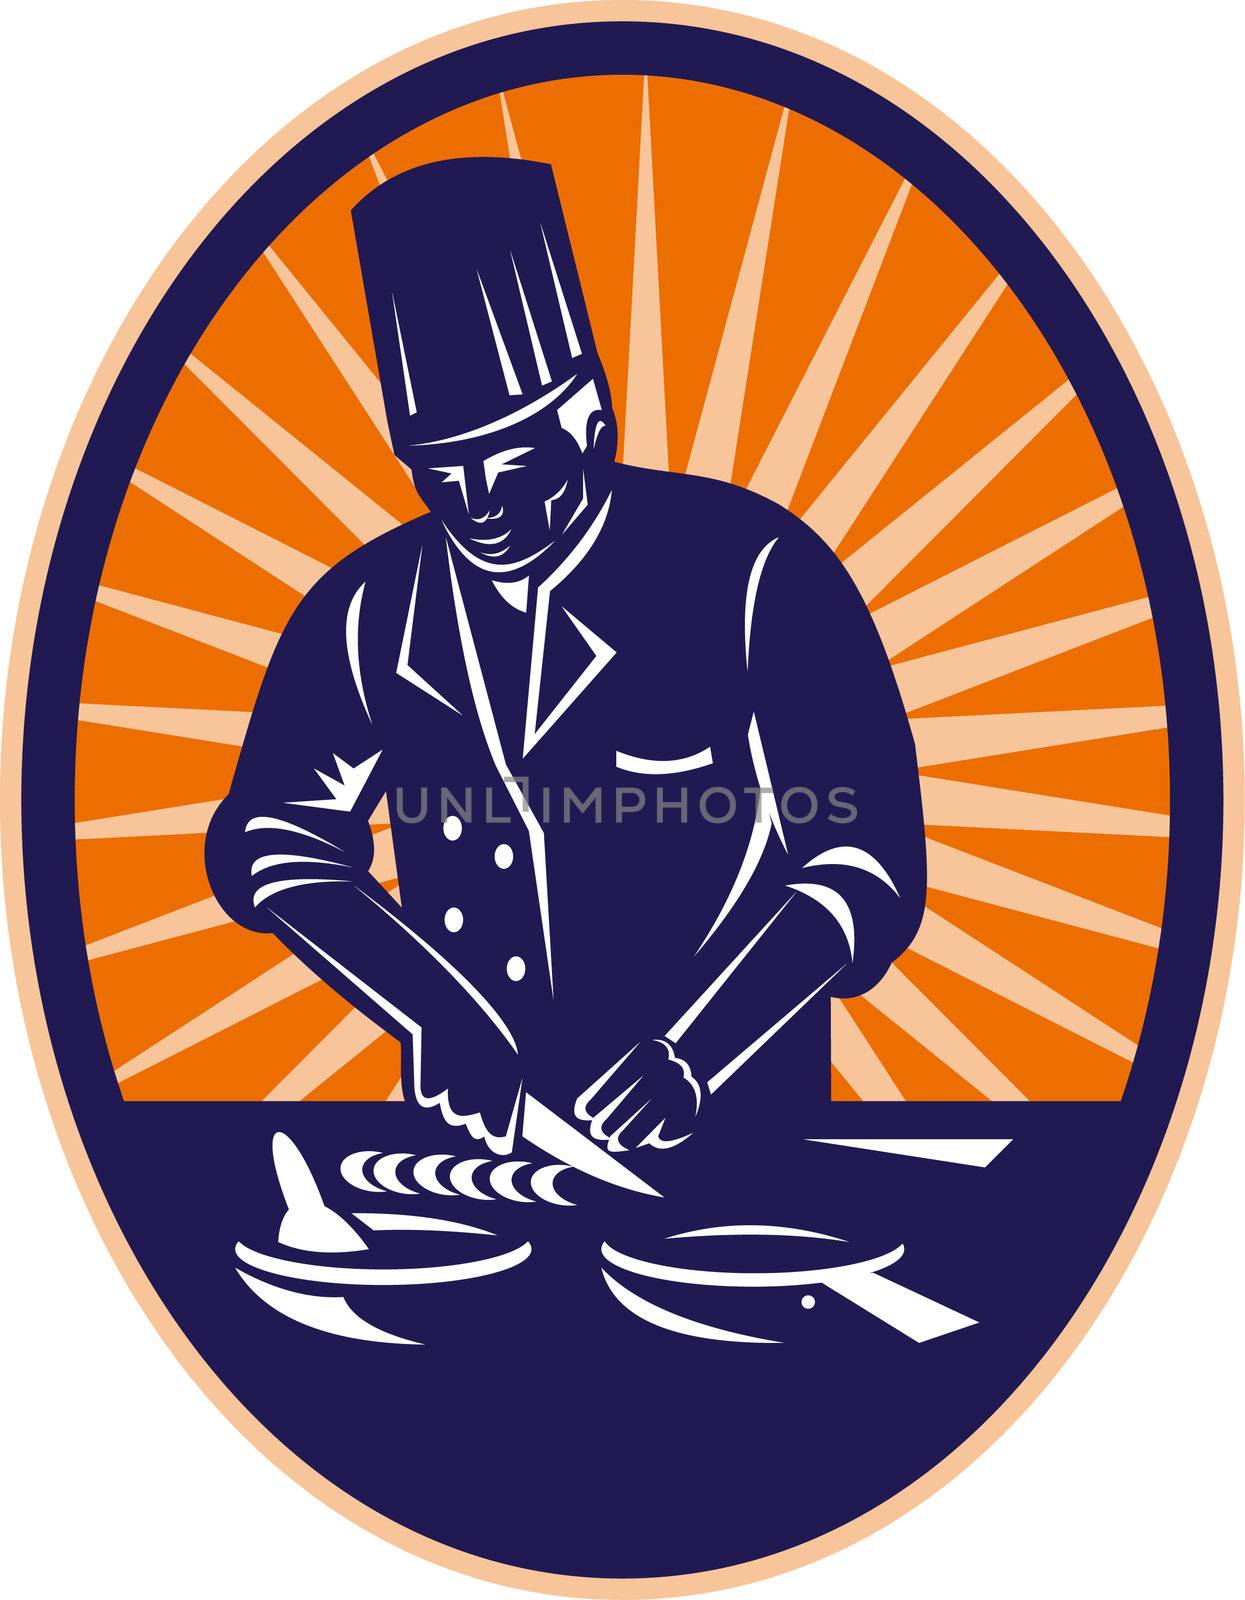 retro style illustration of a chef cook preparing food set inside an ellipse with sunburst in background